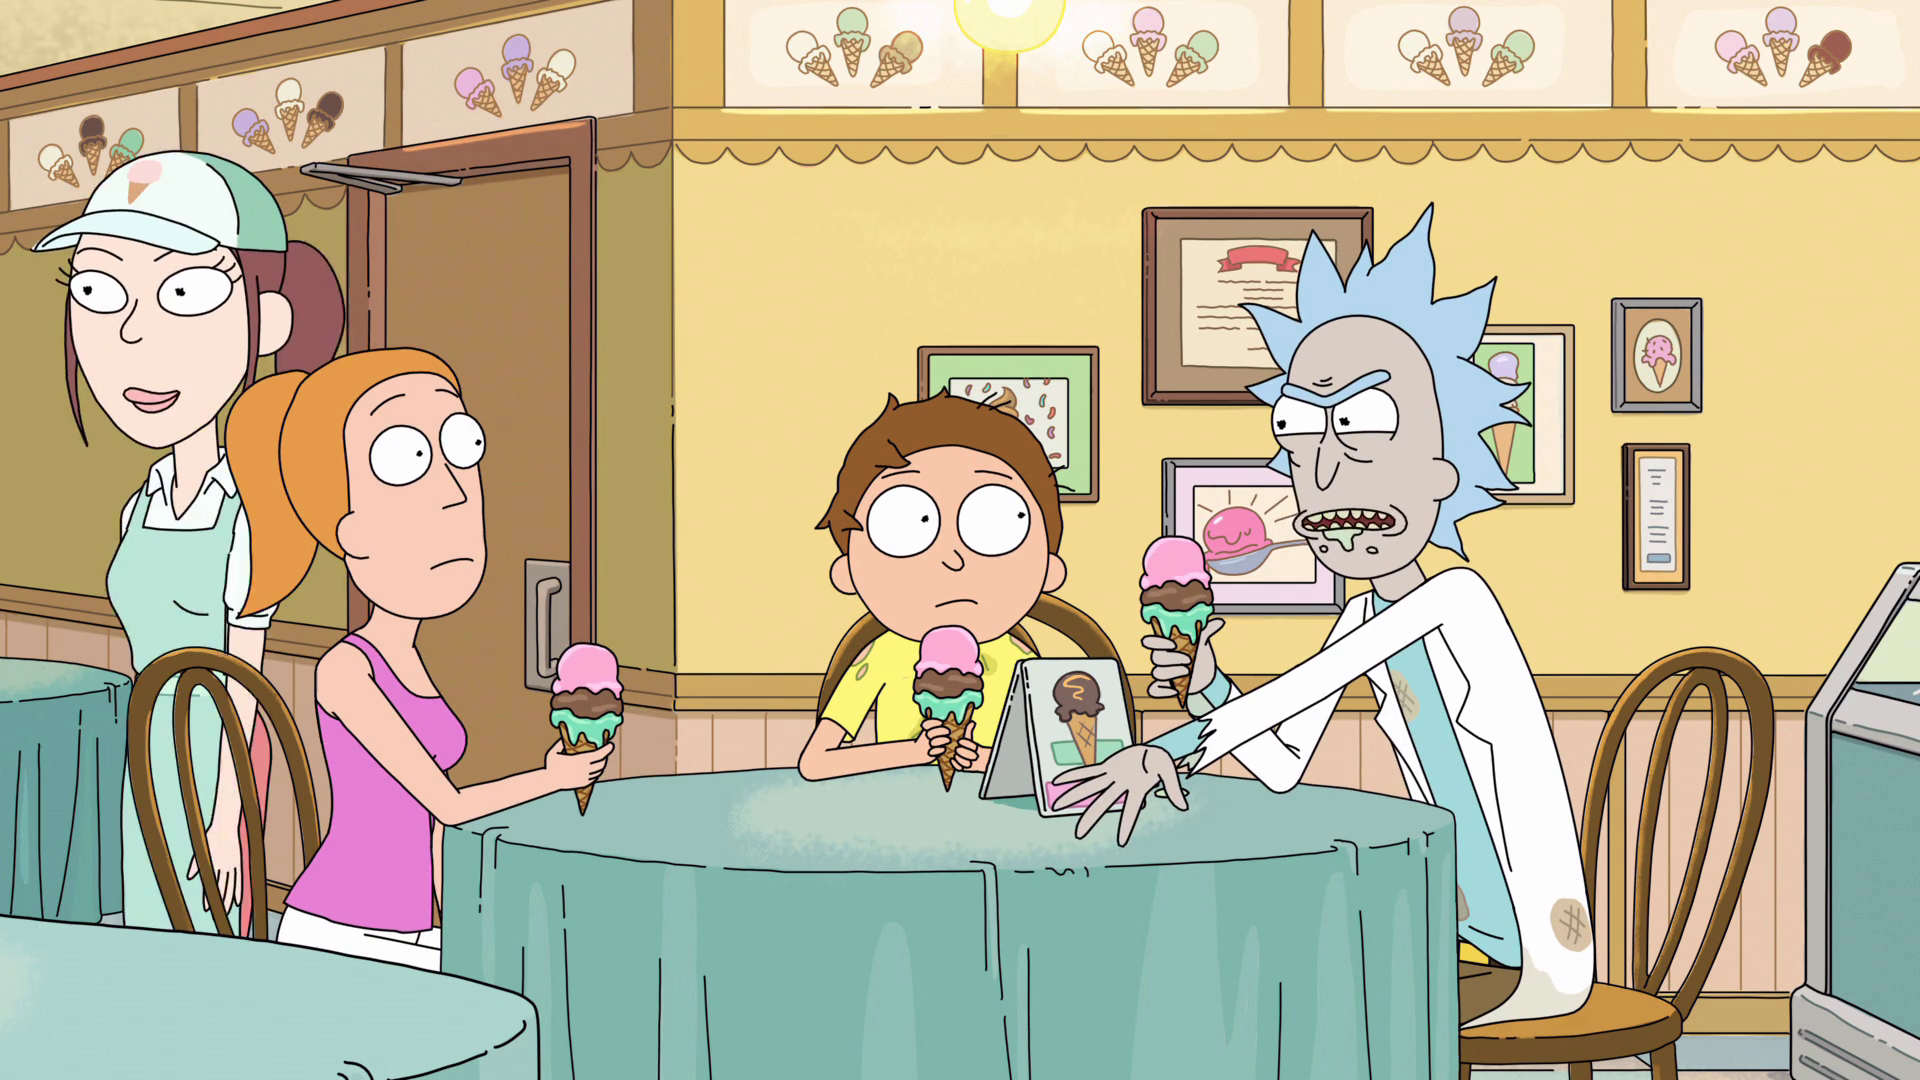 S2E6 Rick Blames Summer Immediately.png - Immediately, Transparent background PNG HD thumbnail